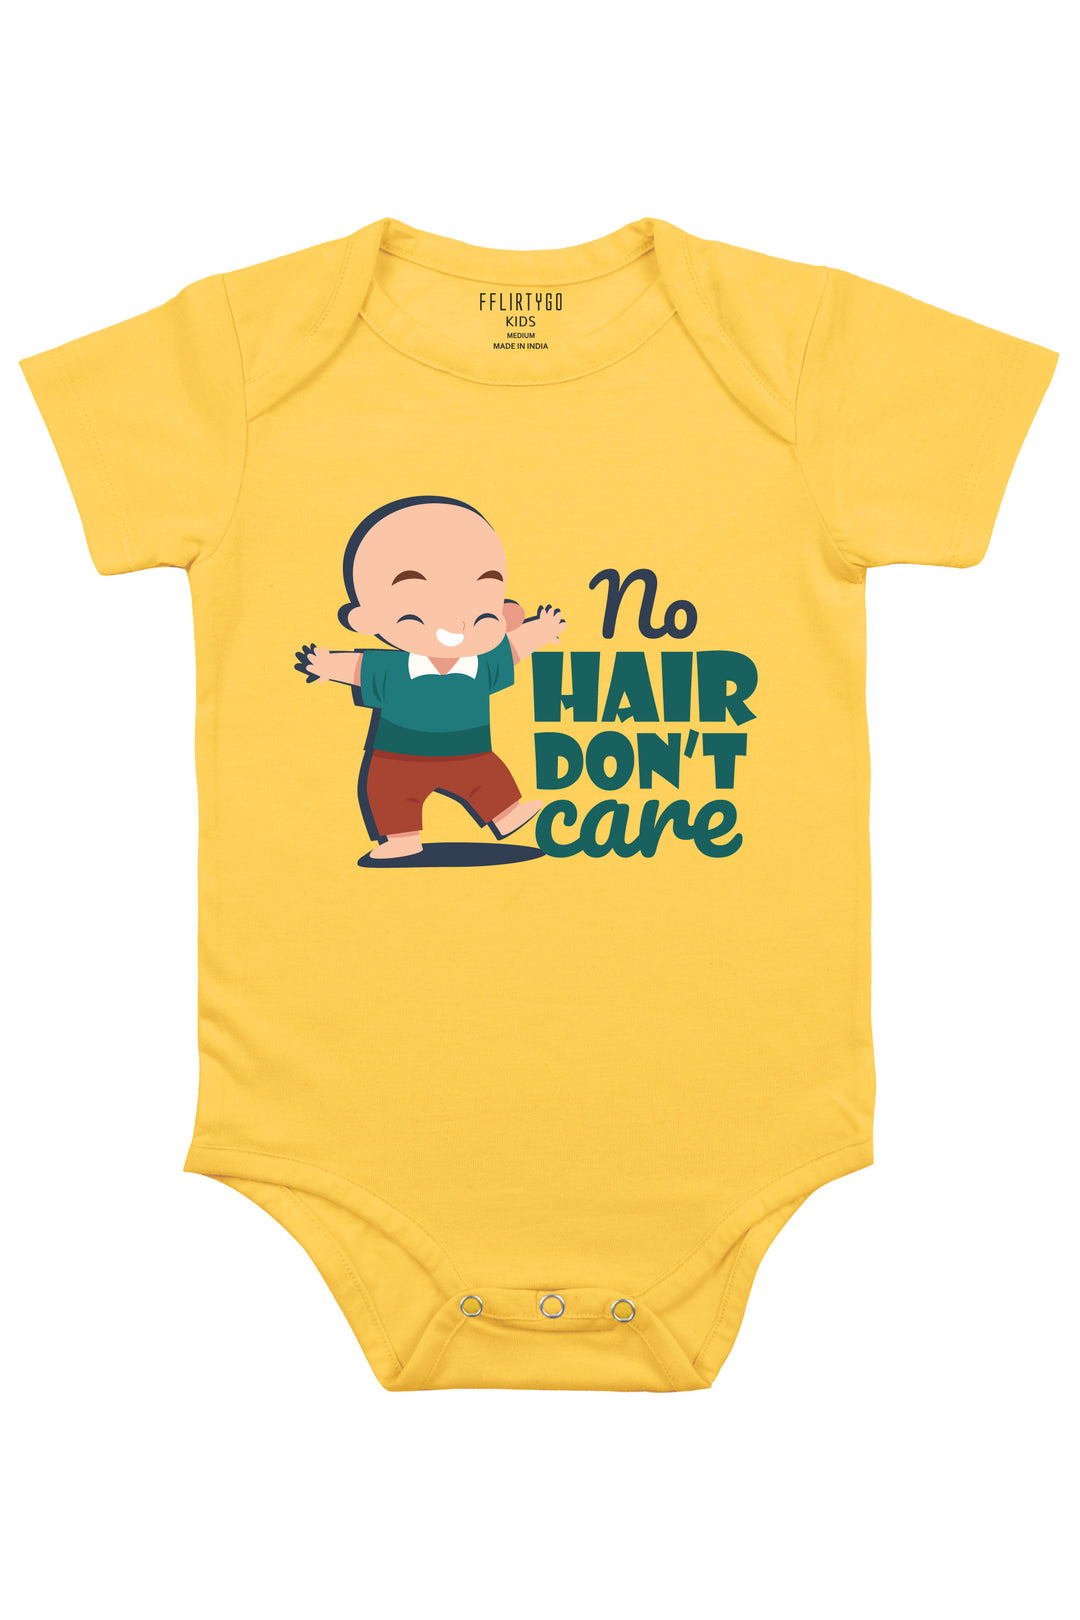 No Hair - Don't Care Baby Romper | Onesies